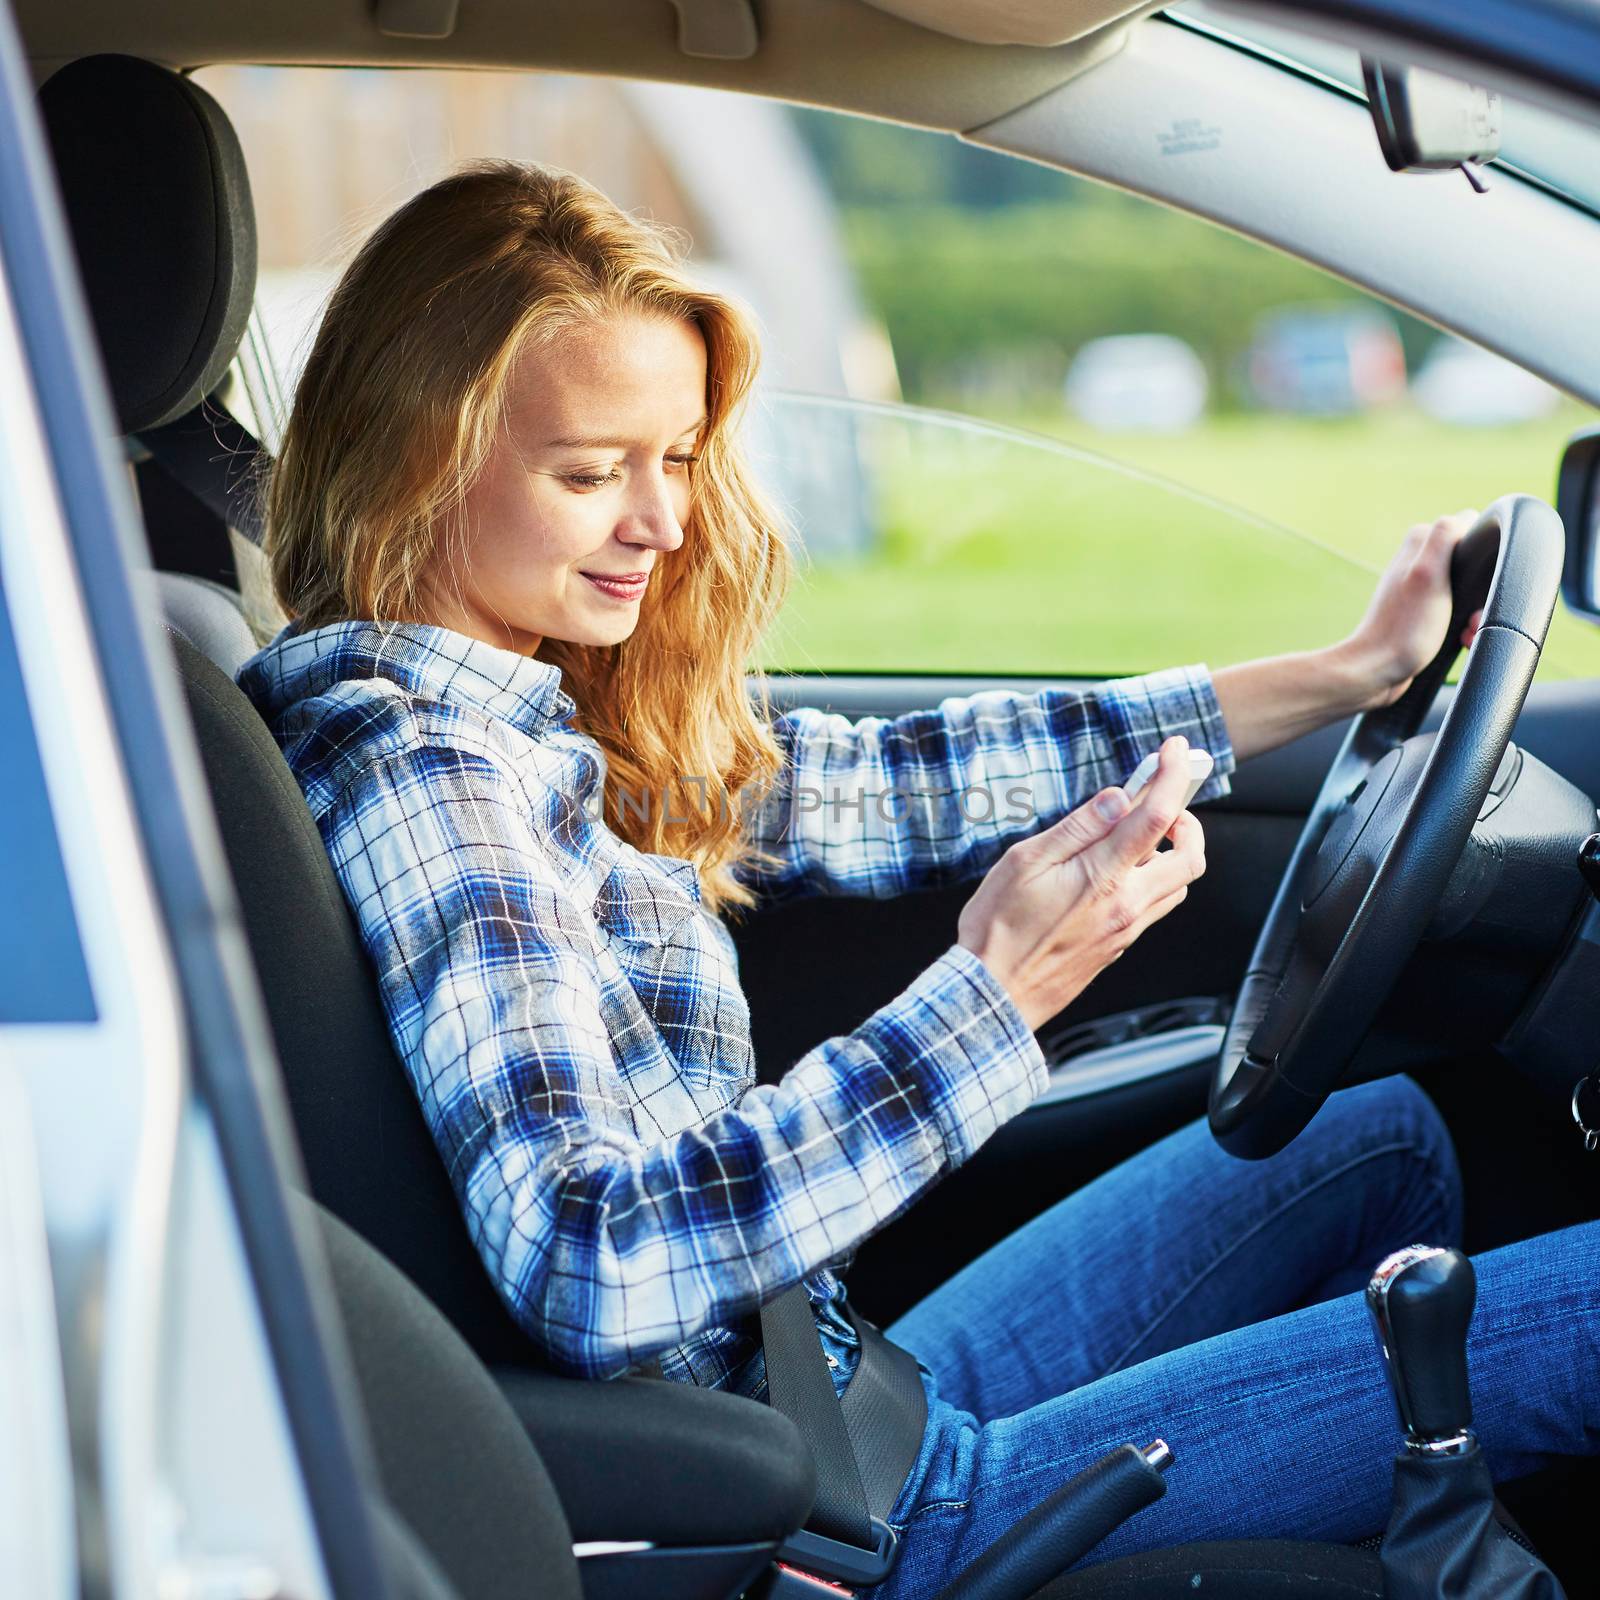 Young woman using her smartphone while driving a car